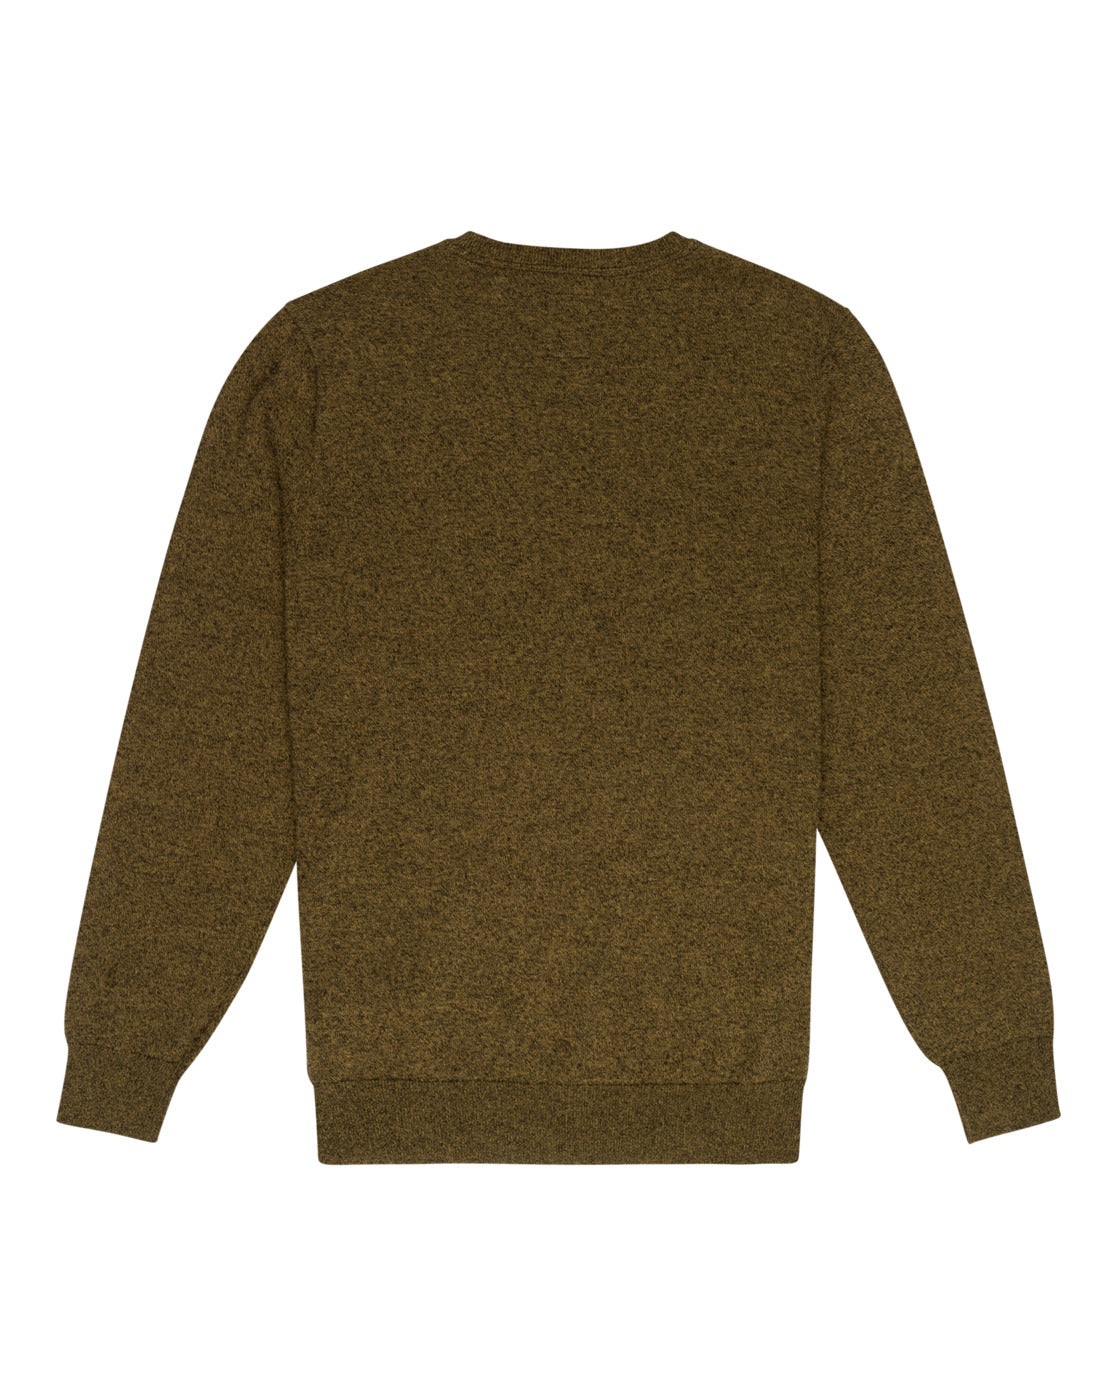 Jersey Element Eco - Dull Gold